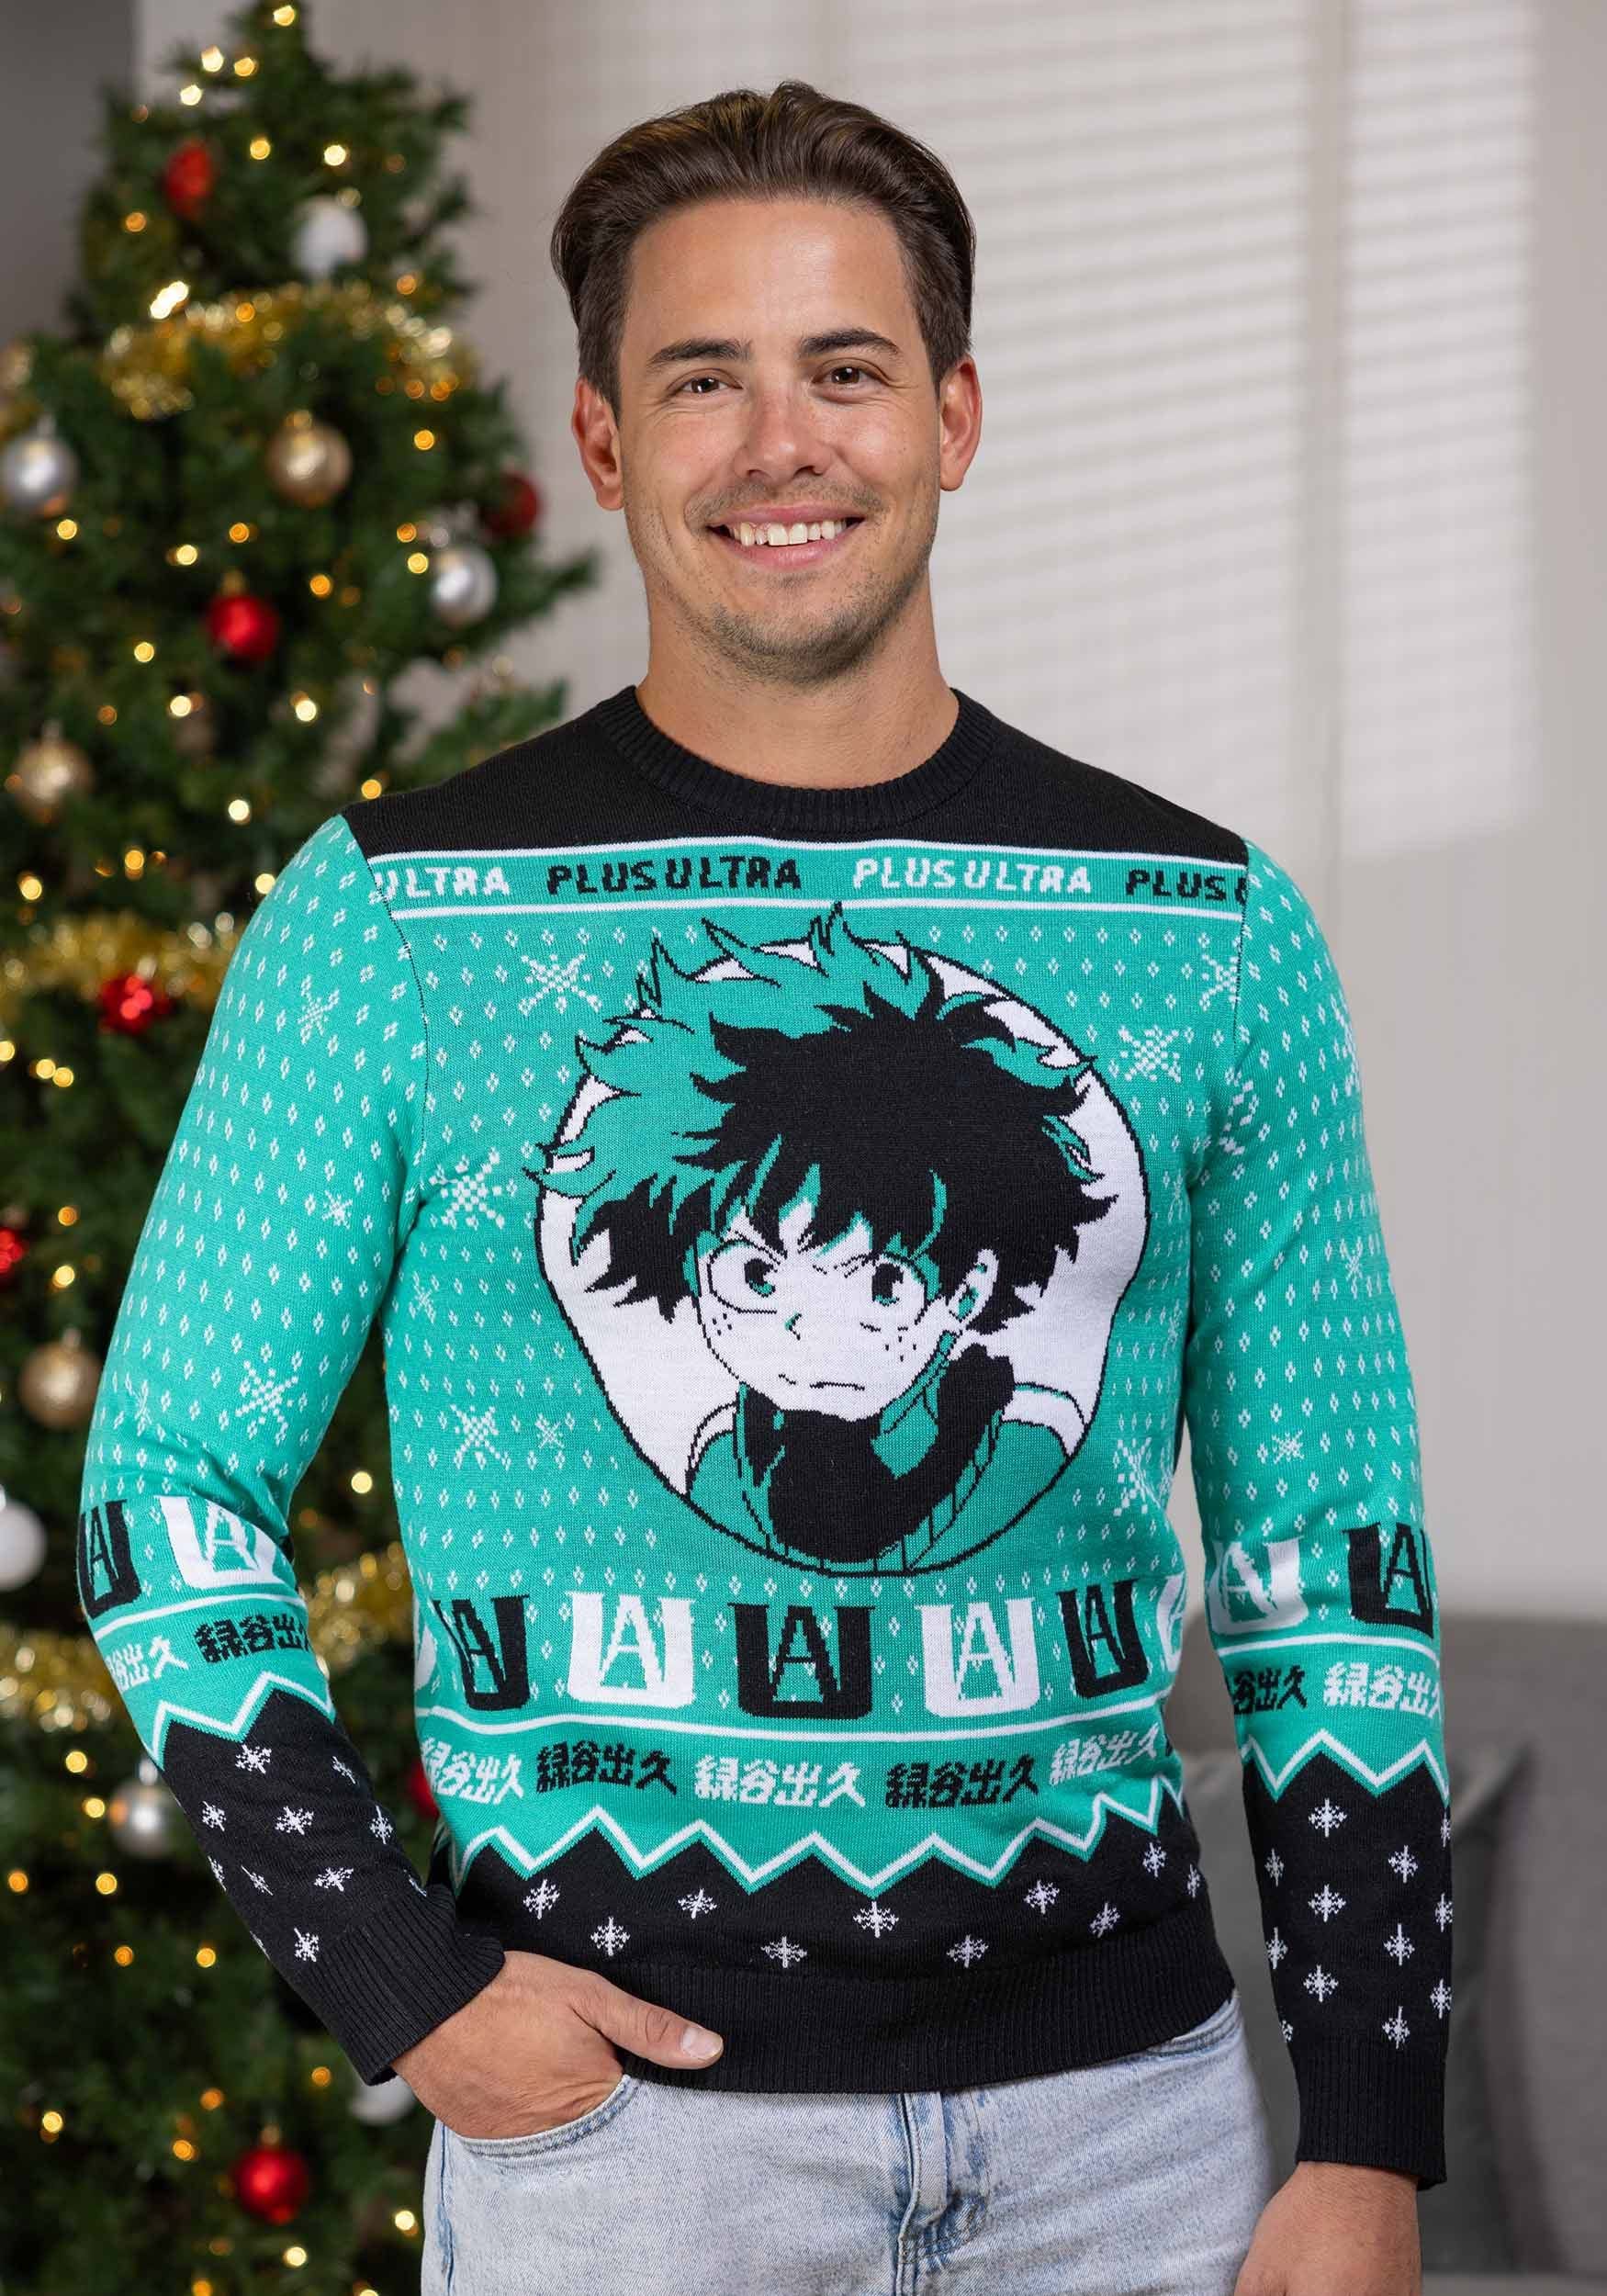 https://images.fun.com/products/83643/1-1/adult-my-hero-academia-ugly-christmas-sweater.jpg